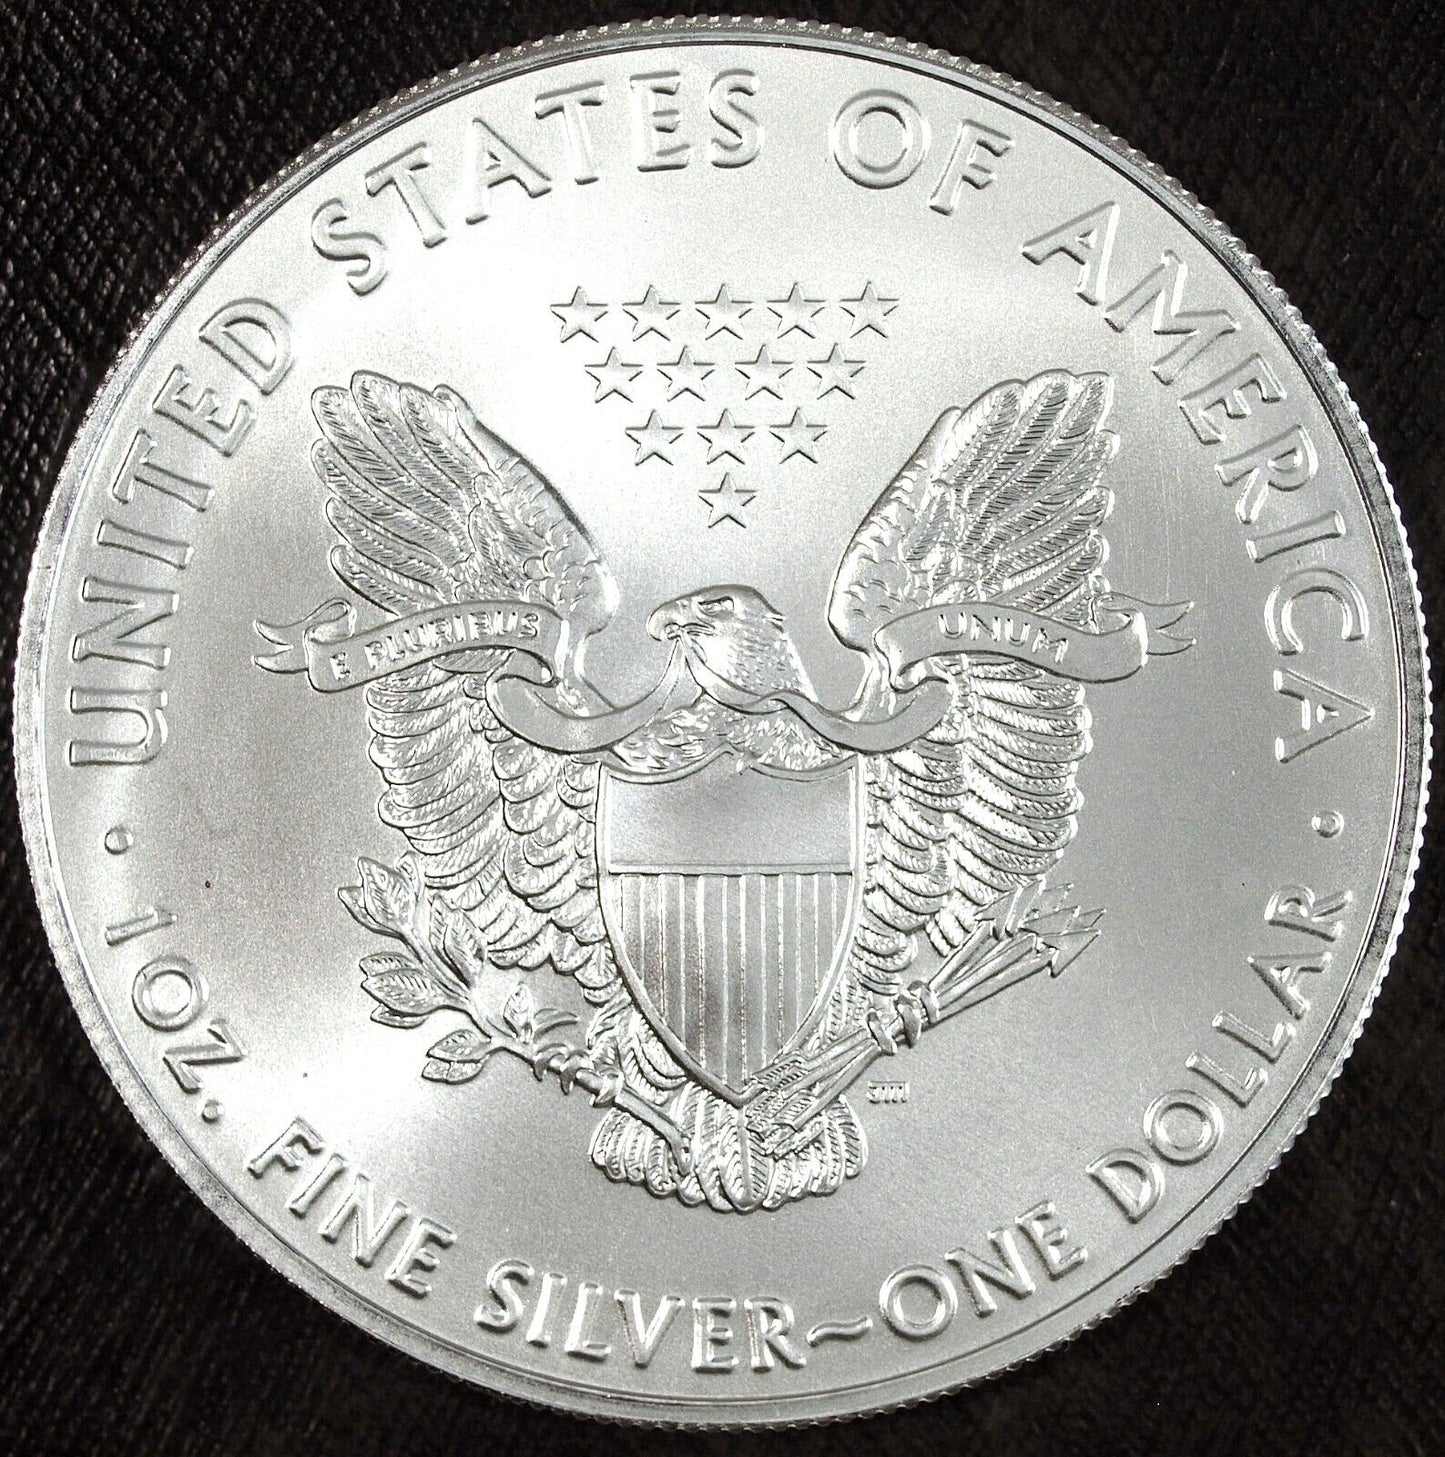 2020 US Mint American Silver Eagle ☆☆ Uncirculated ☆☆ Great Collectible 611